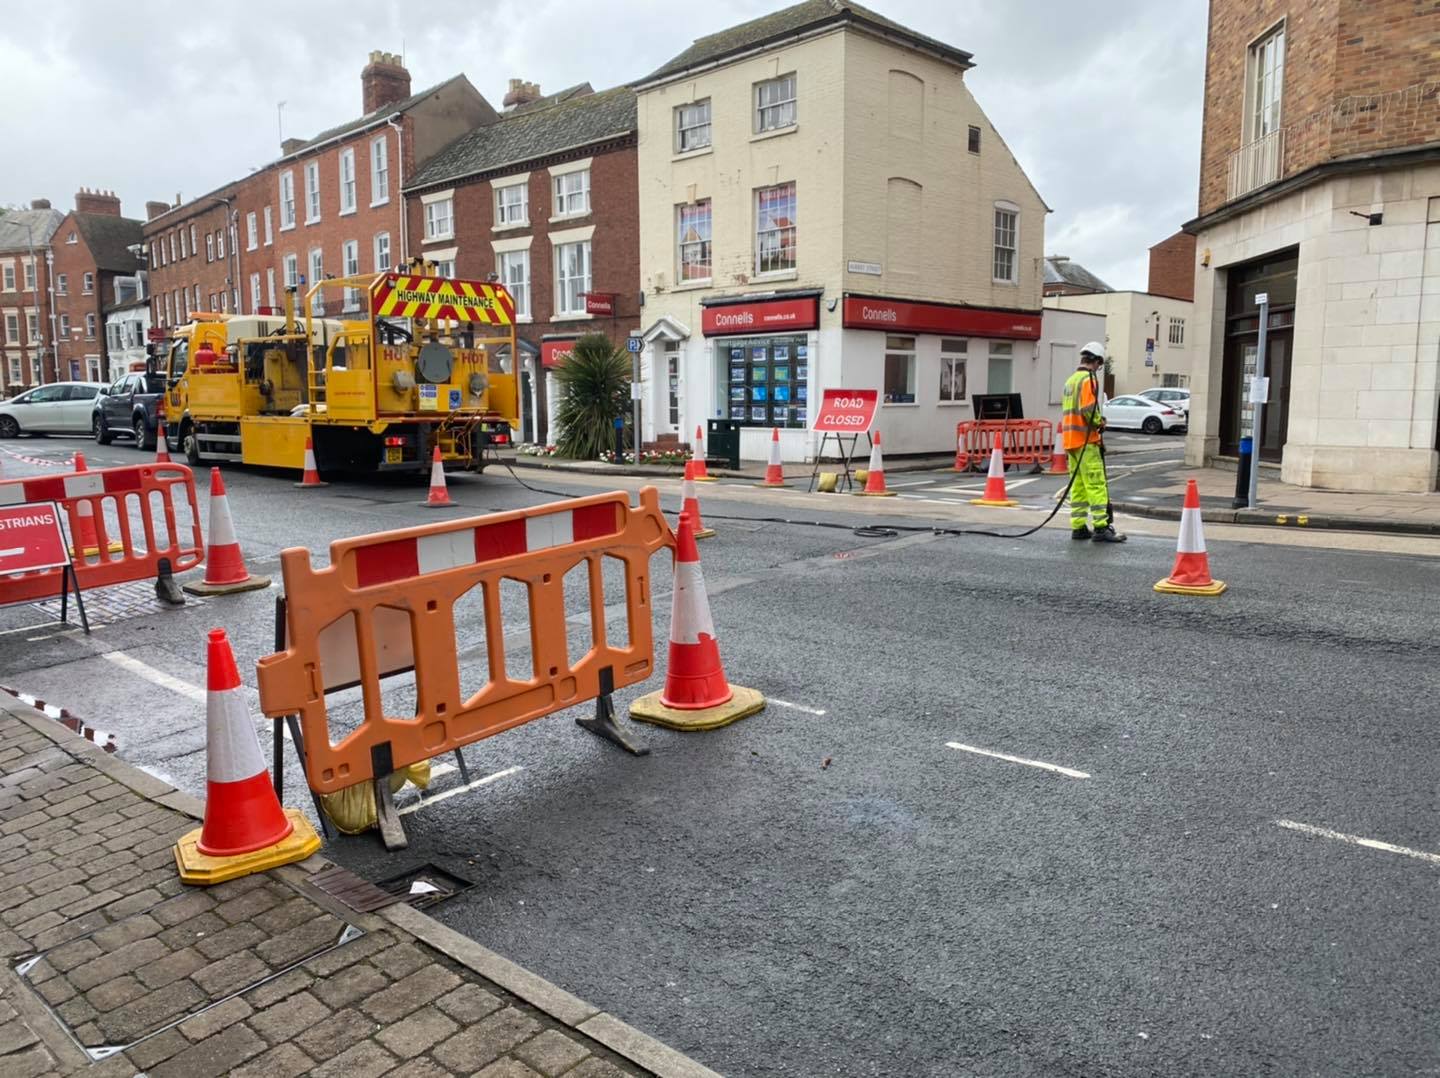 NEWS | Businesses utterly dismayed by ‘crazy’ traffic measures that have been introduced without consultation